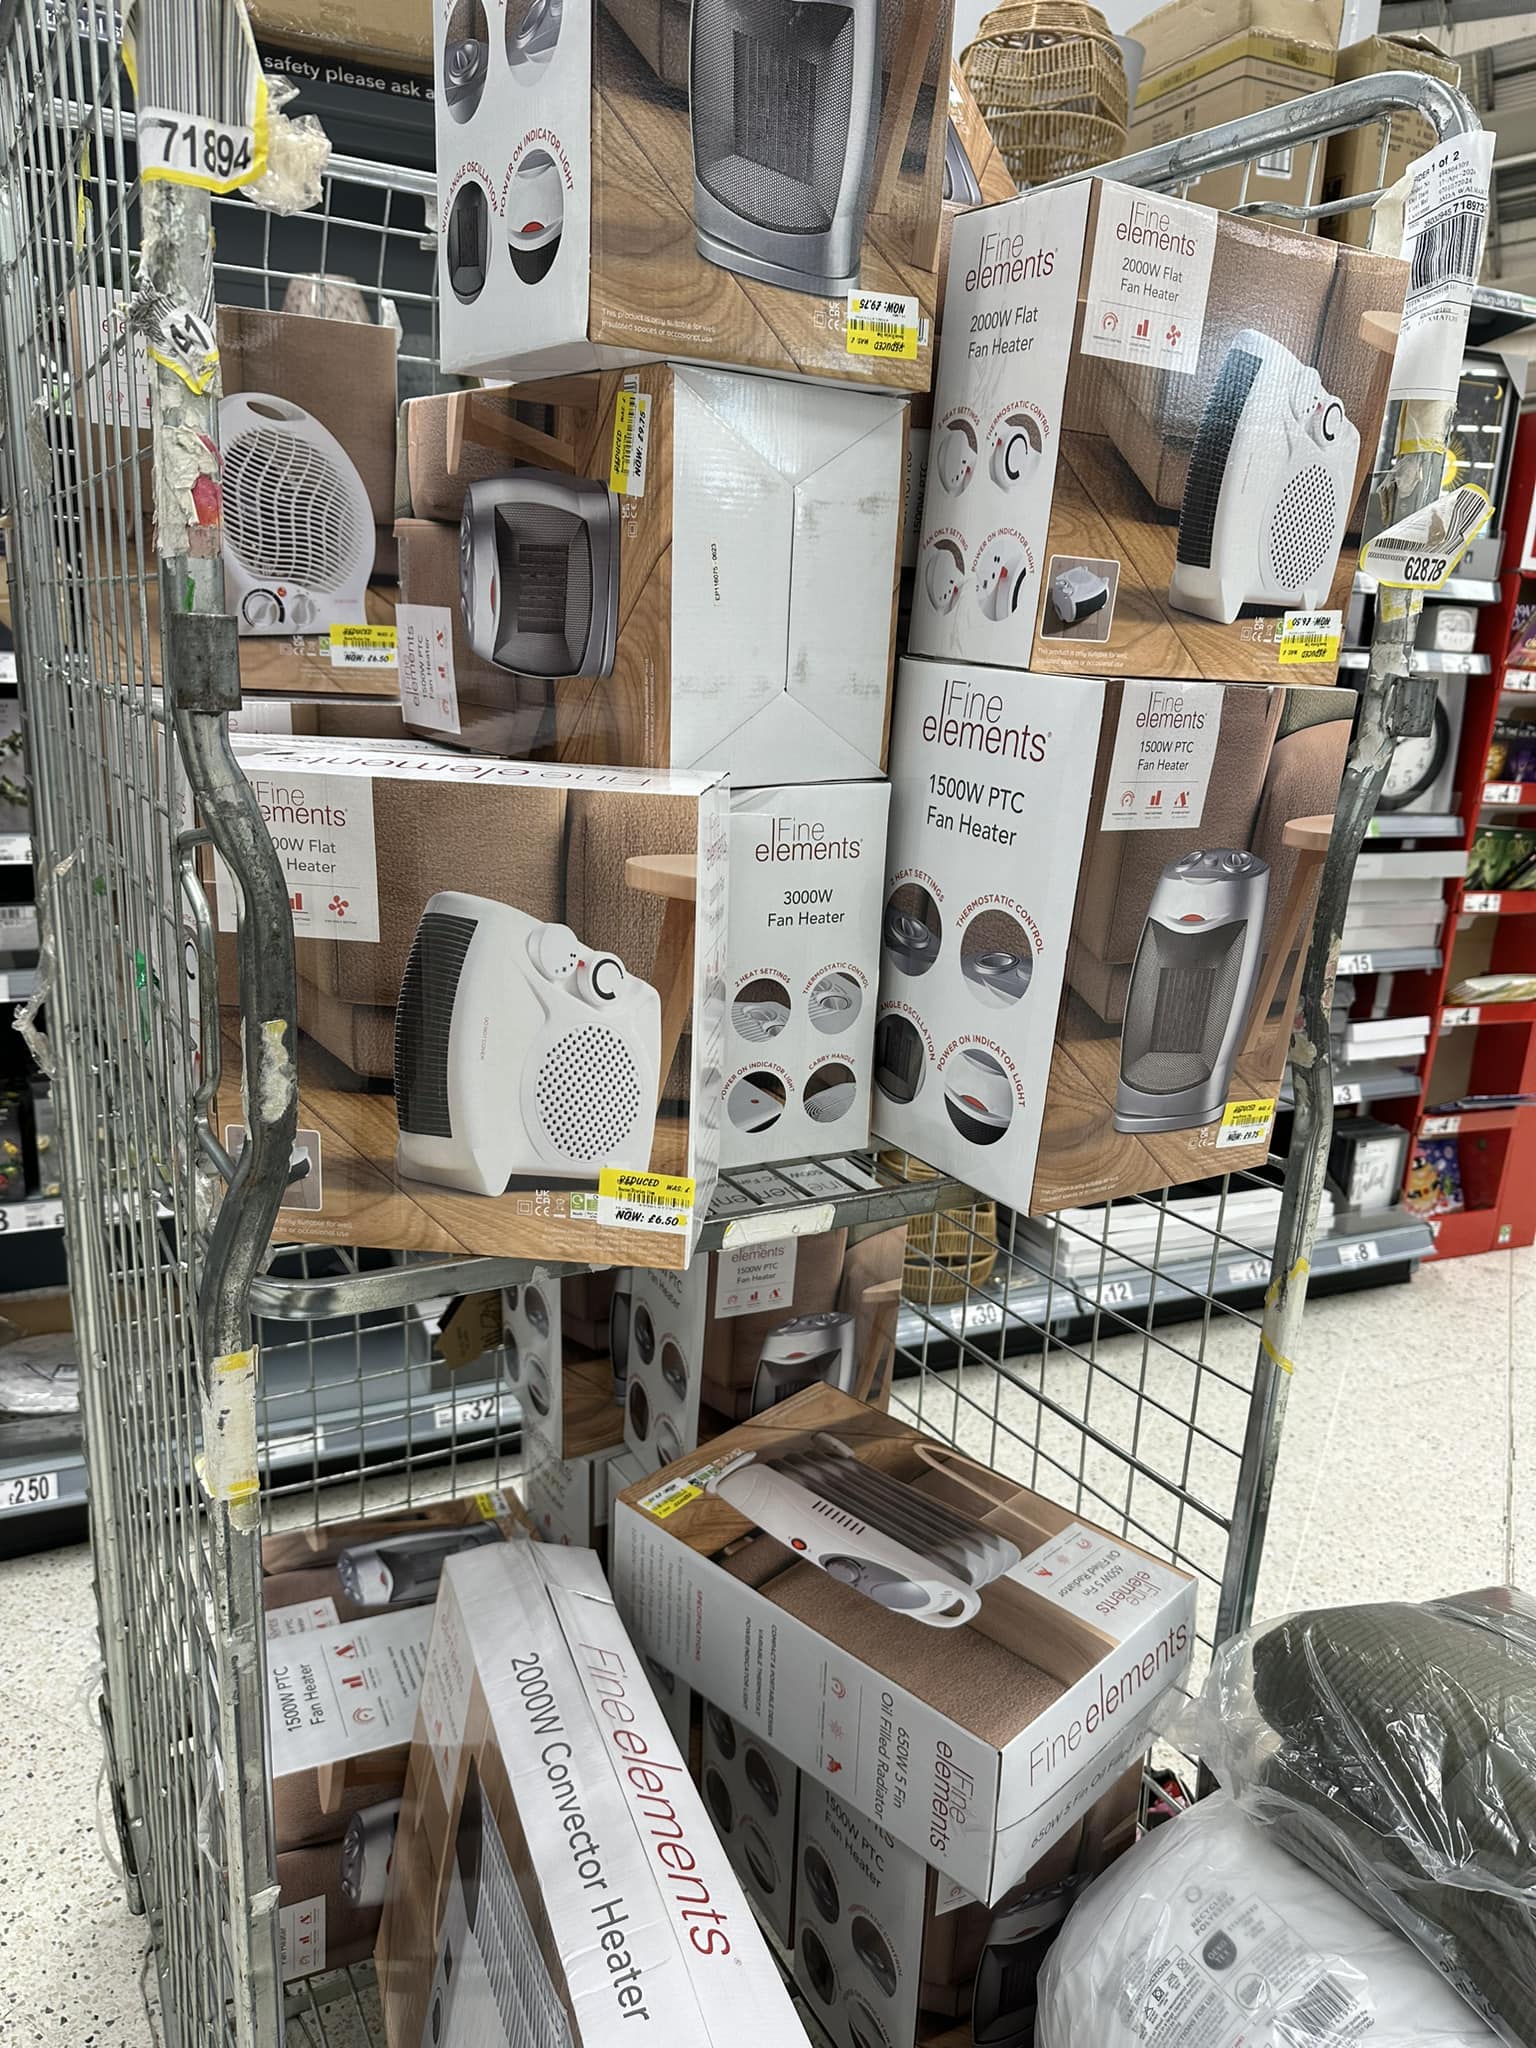 An Asda shopper spotted a fleet of discounted heaters at their local store